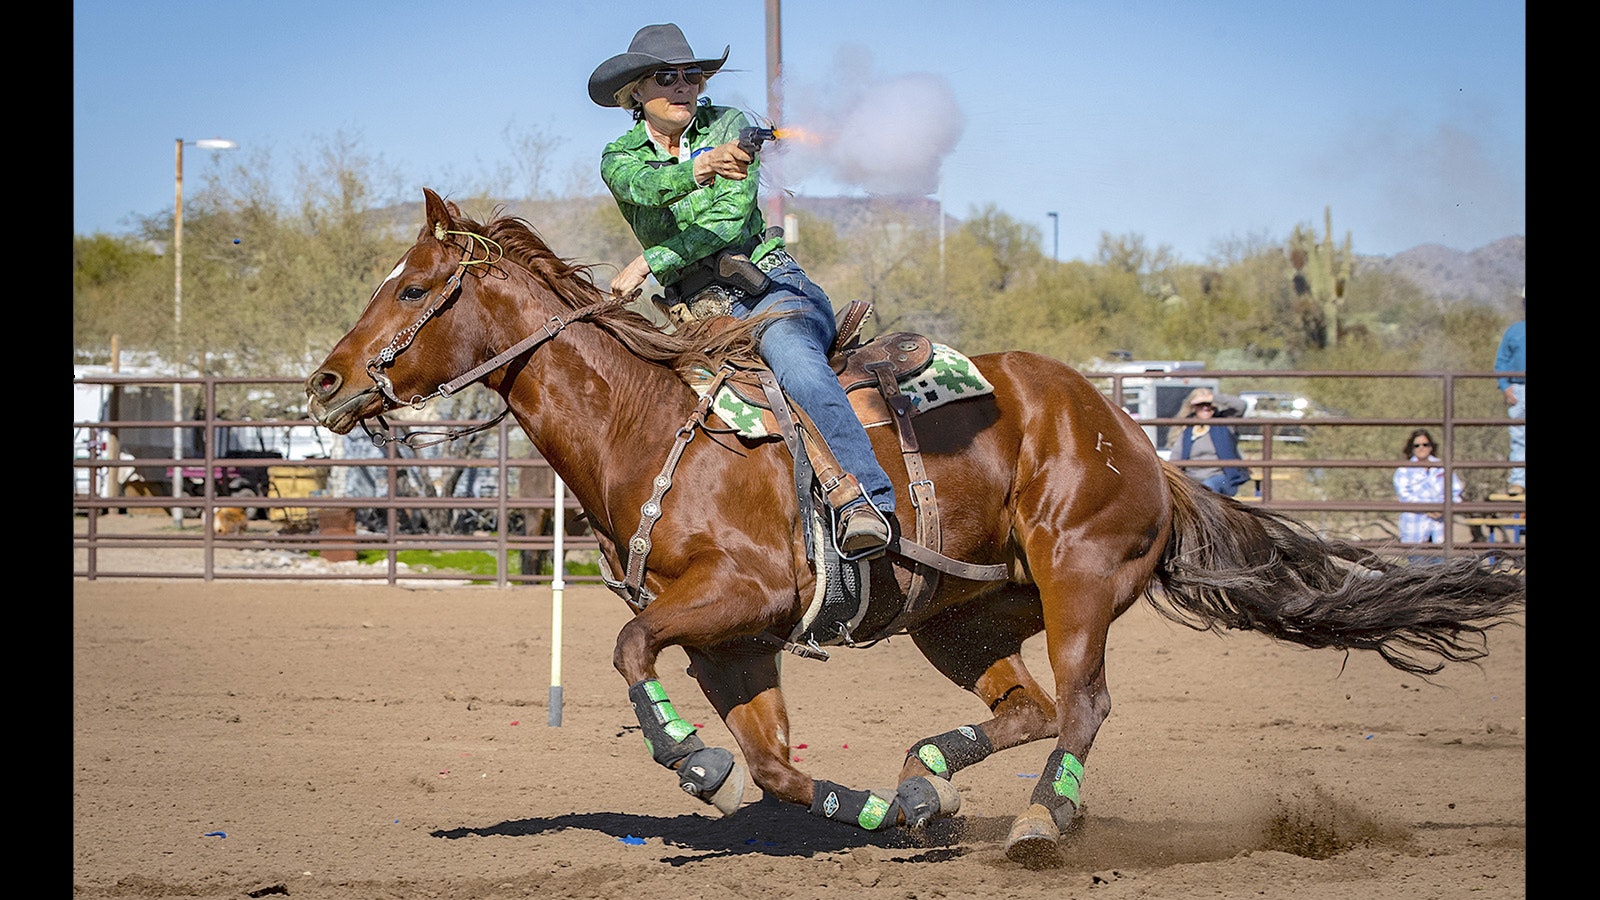 Most horses, as well as competitors, use ear plugs in the sport of cowboy mounted shooting. Notice them here on Kenda Lenseigne's horse.